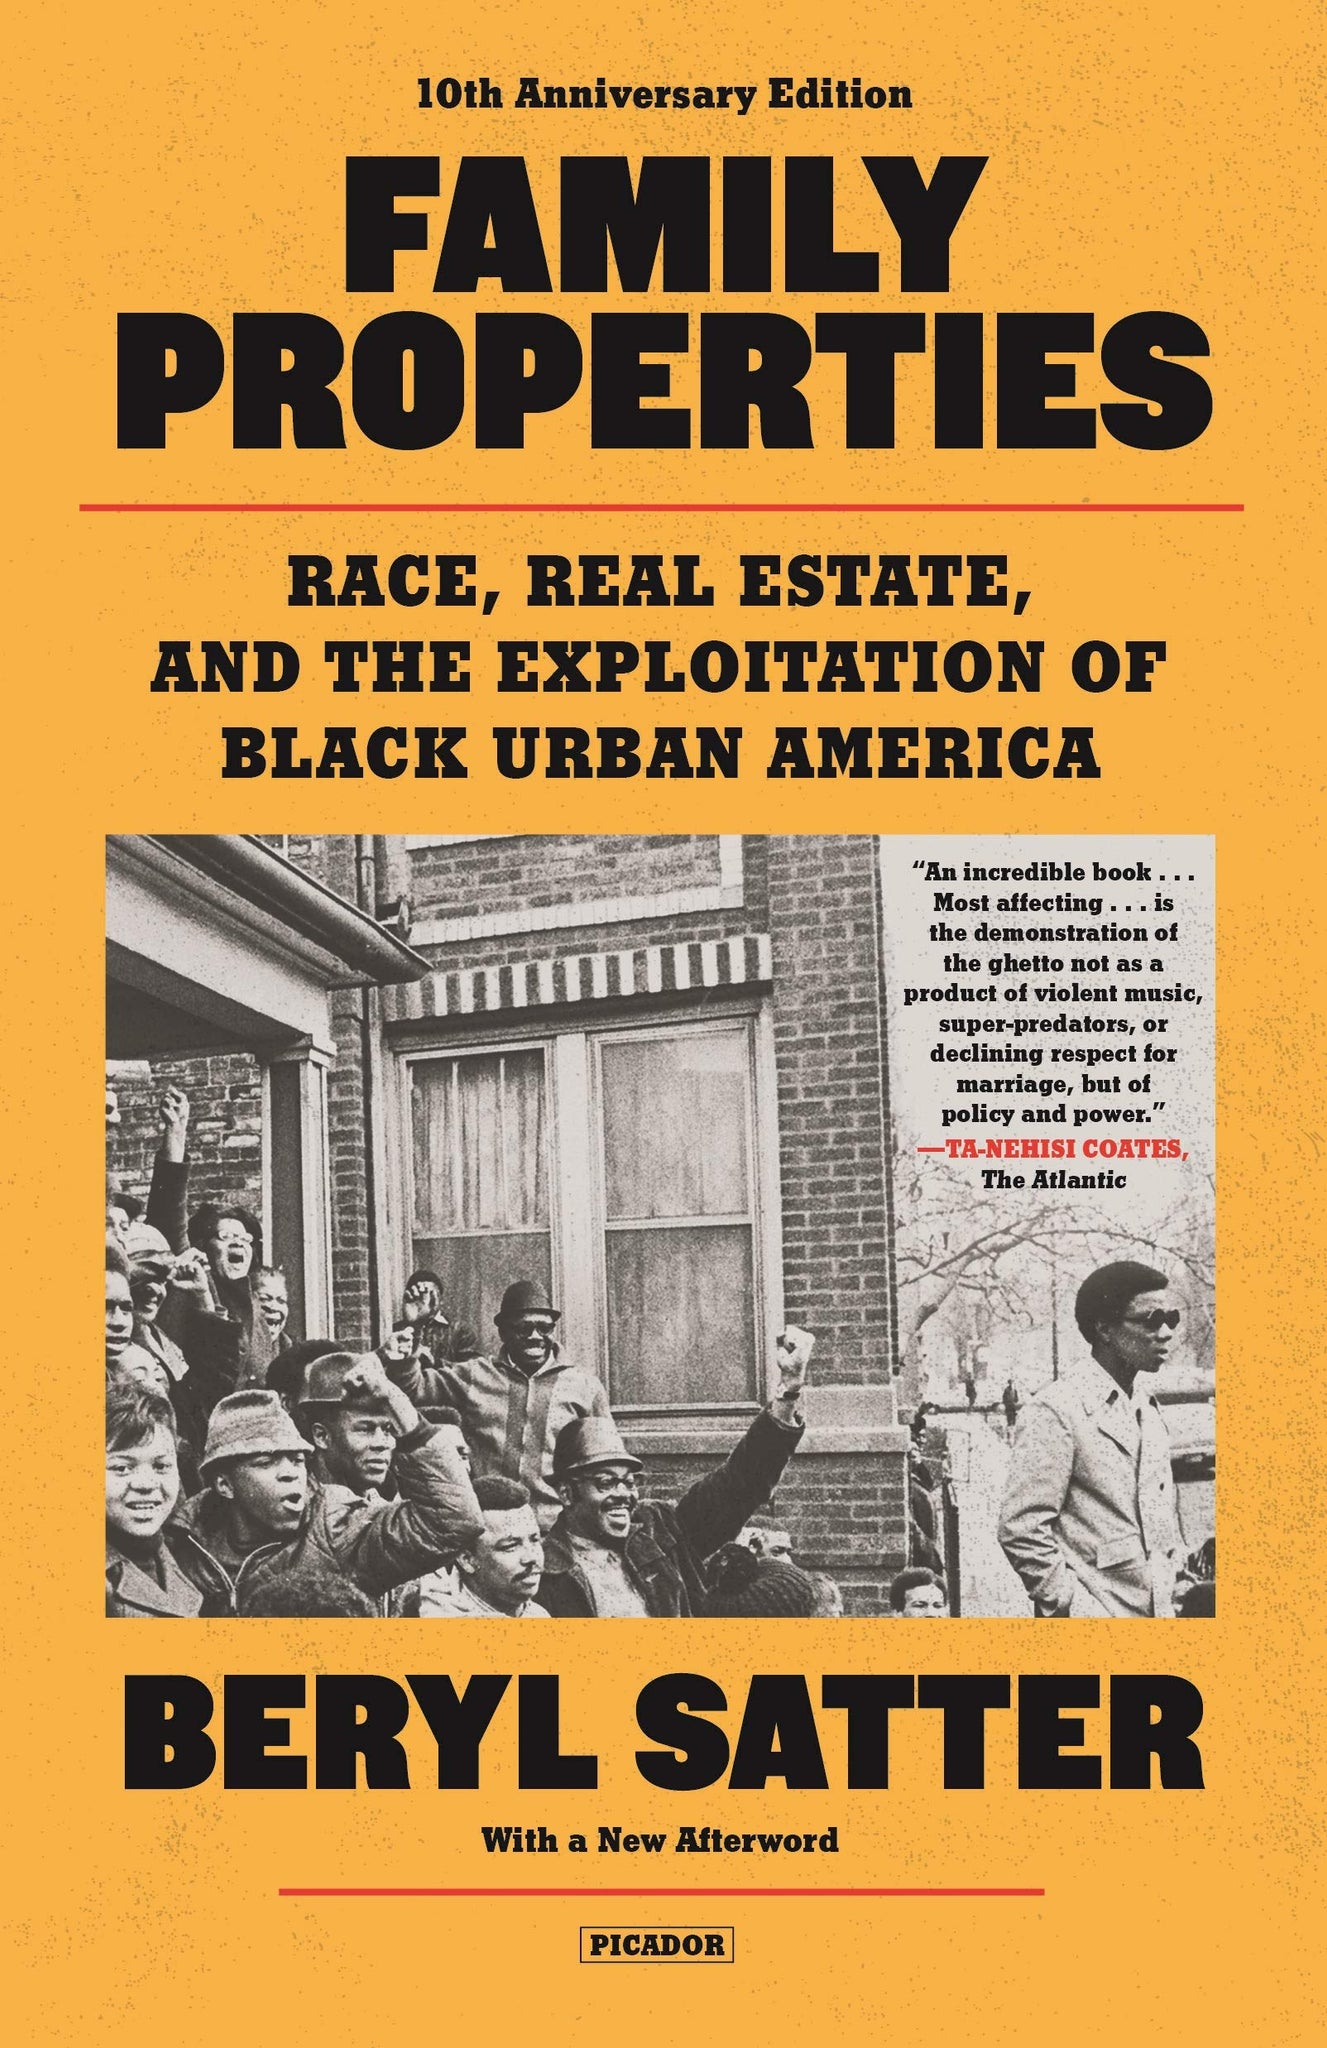 Family Properties (10th Anniversary Edition): Race, Real Estate, and the Exploitation of Black Urban America (Paperback)